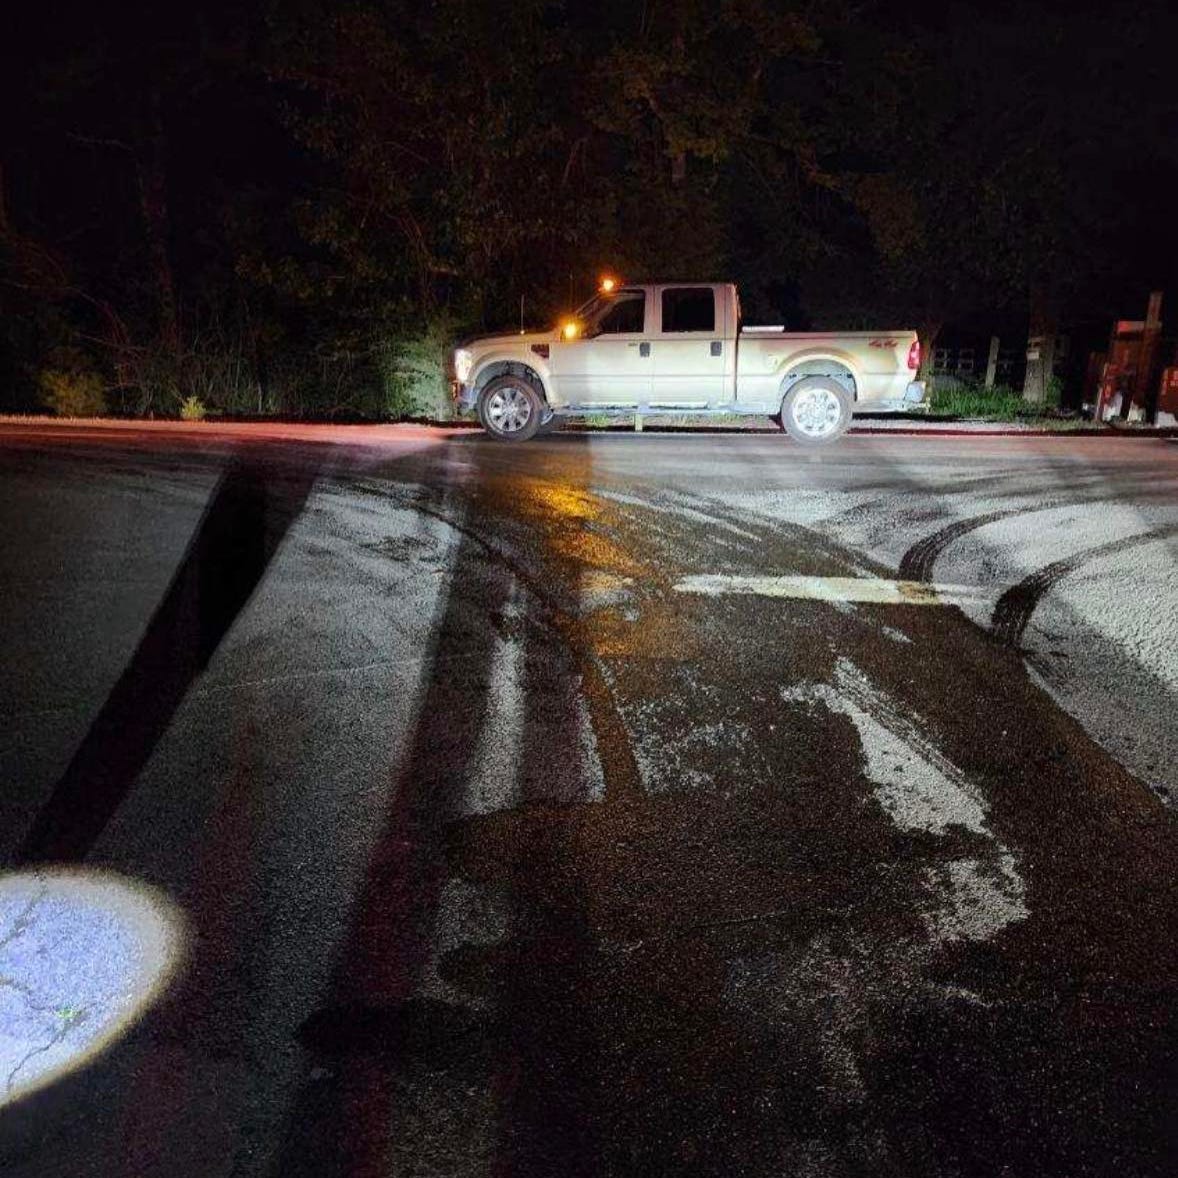 Two people were charged after dumping oil on roads in Lawrence County, Alabama, on May 20, 2023, the Sheriff's Office said.